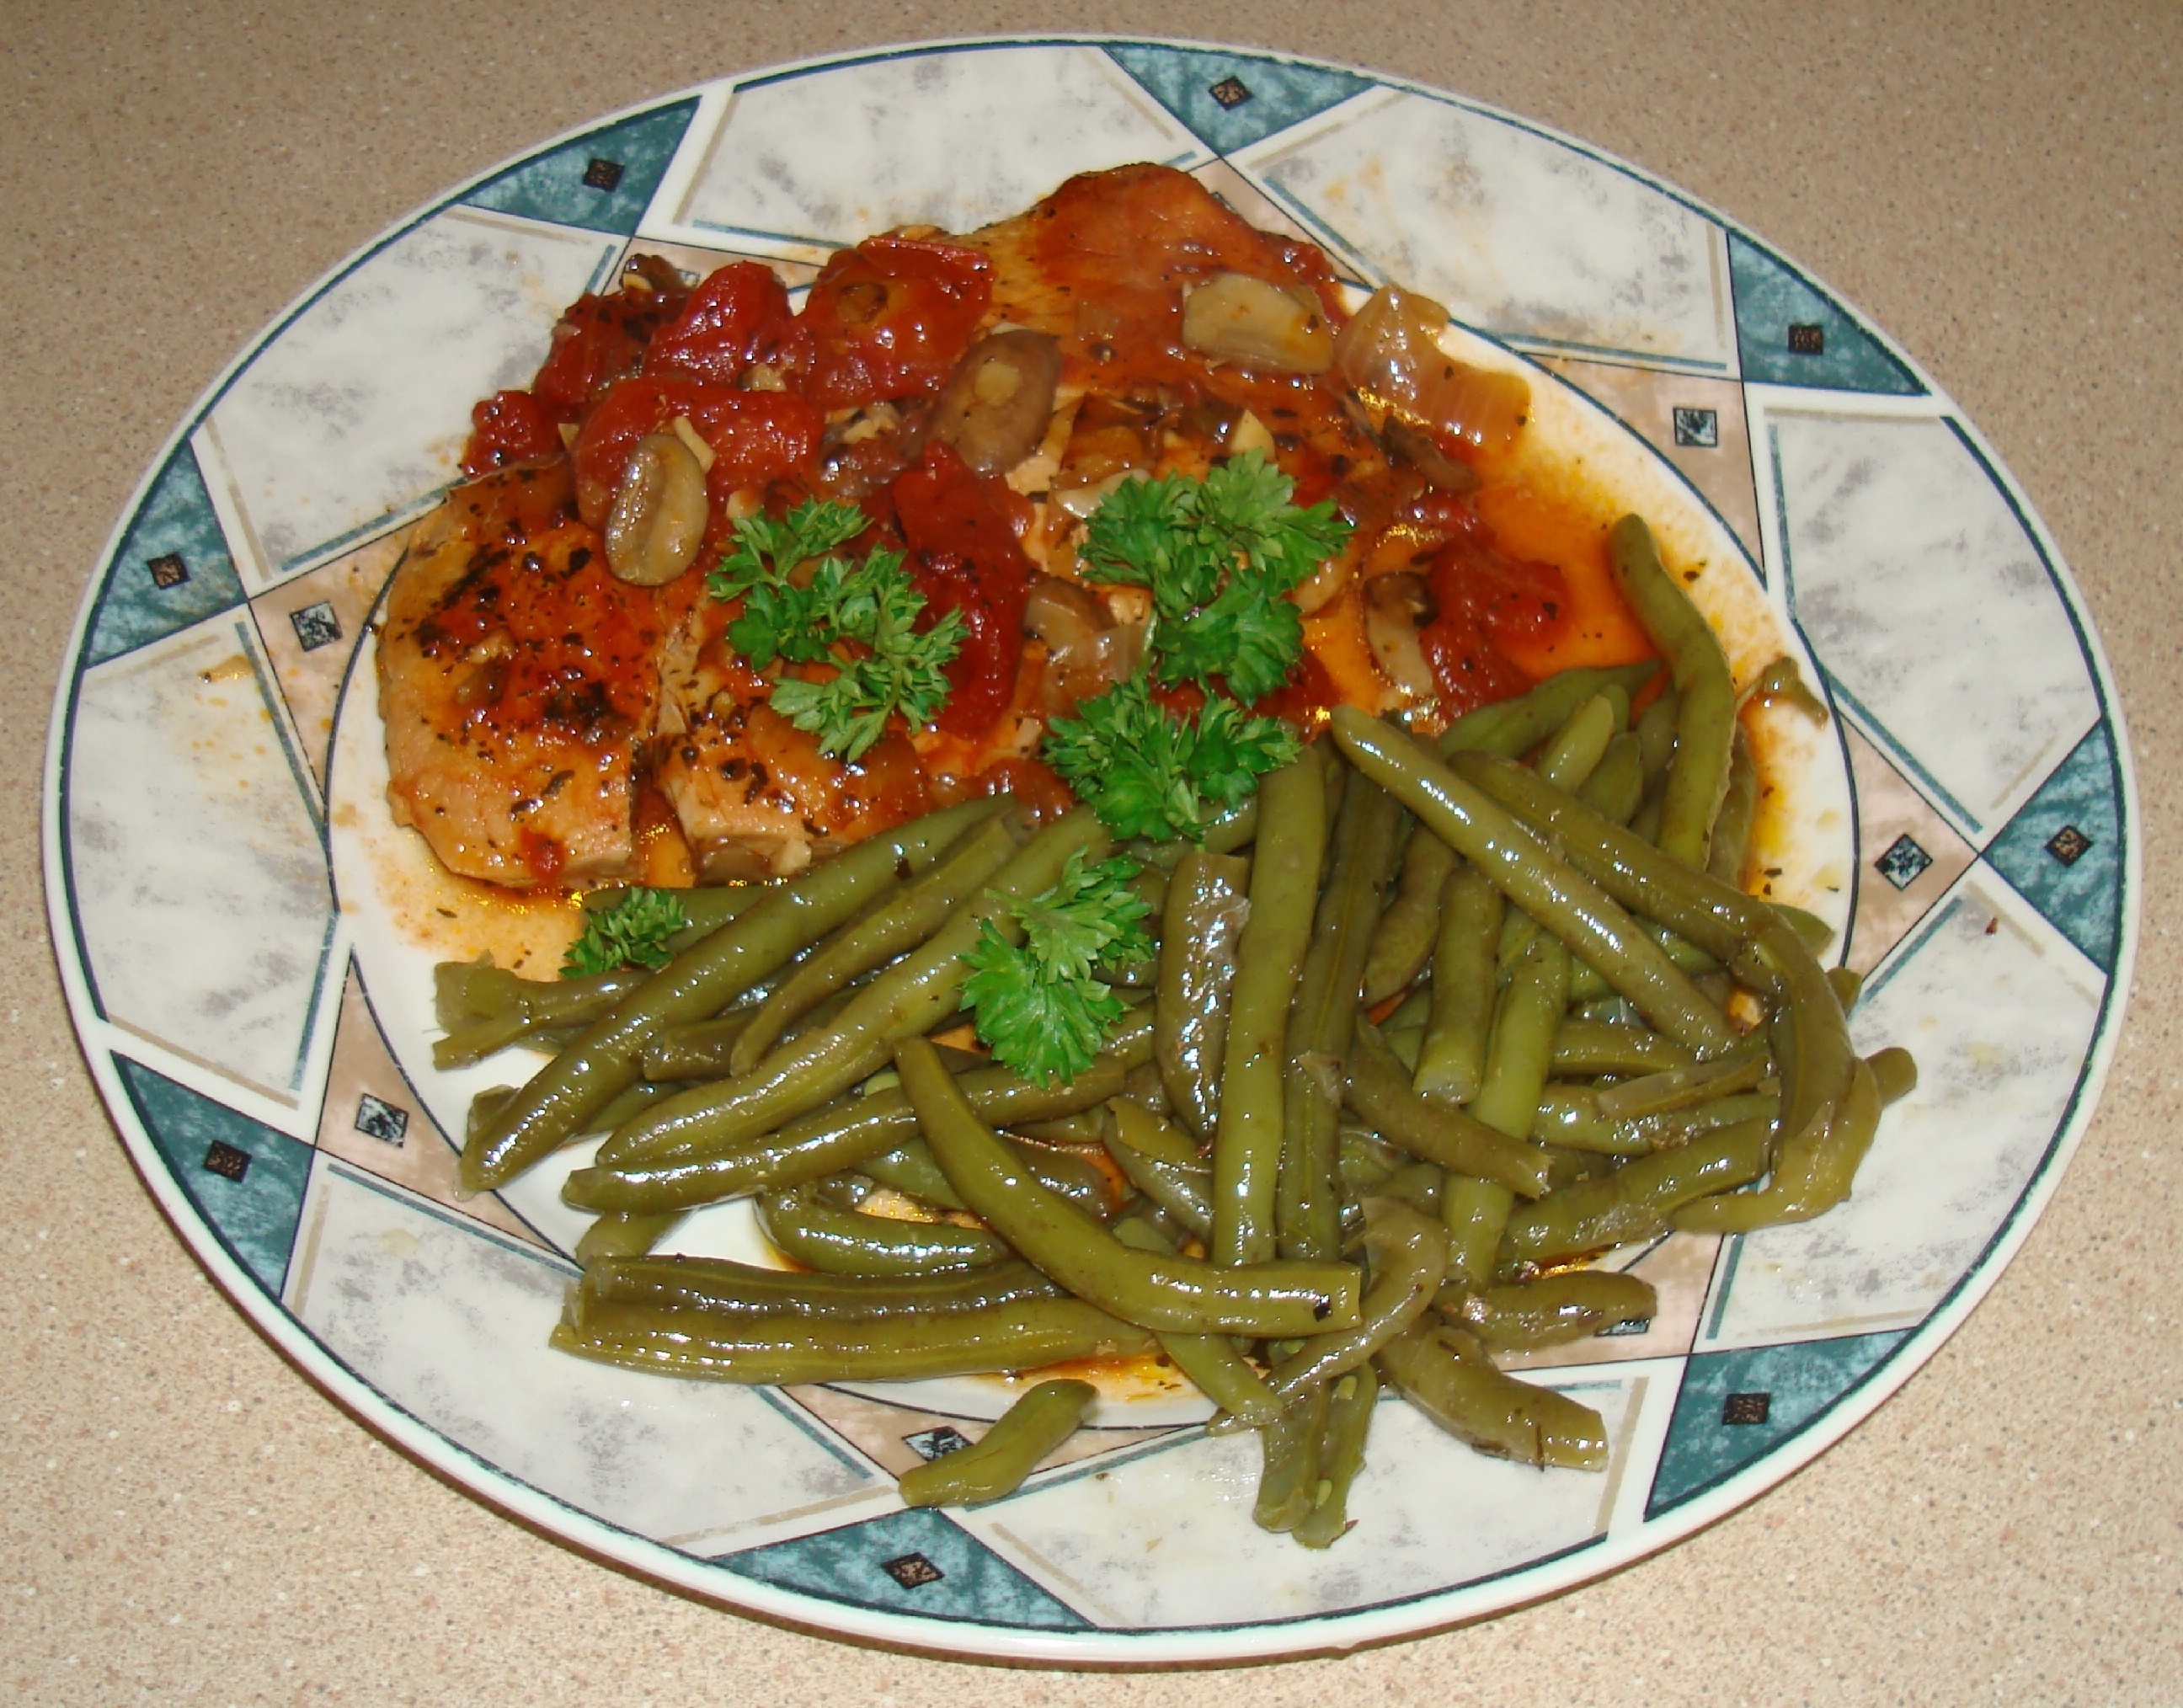 Baked Pork Loin Chop and Steamed String Beans